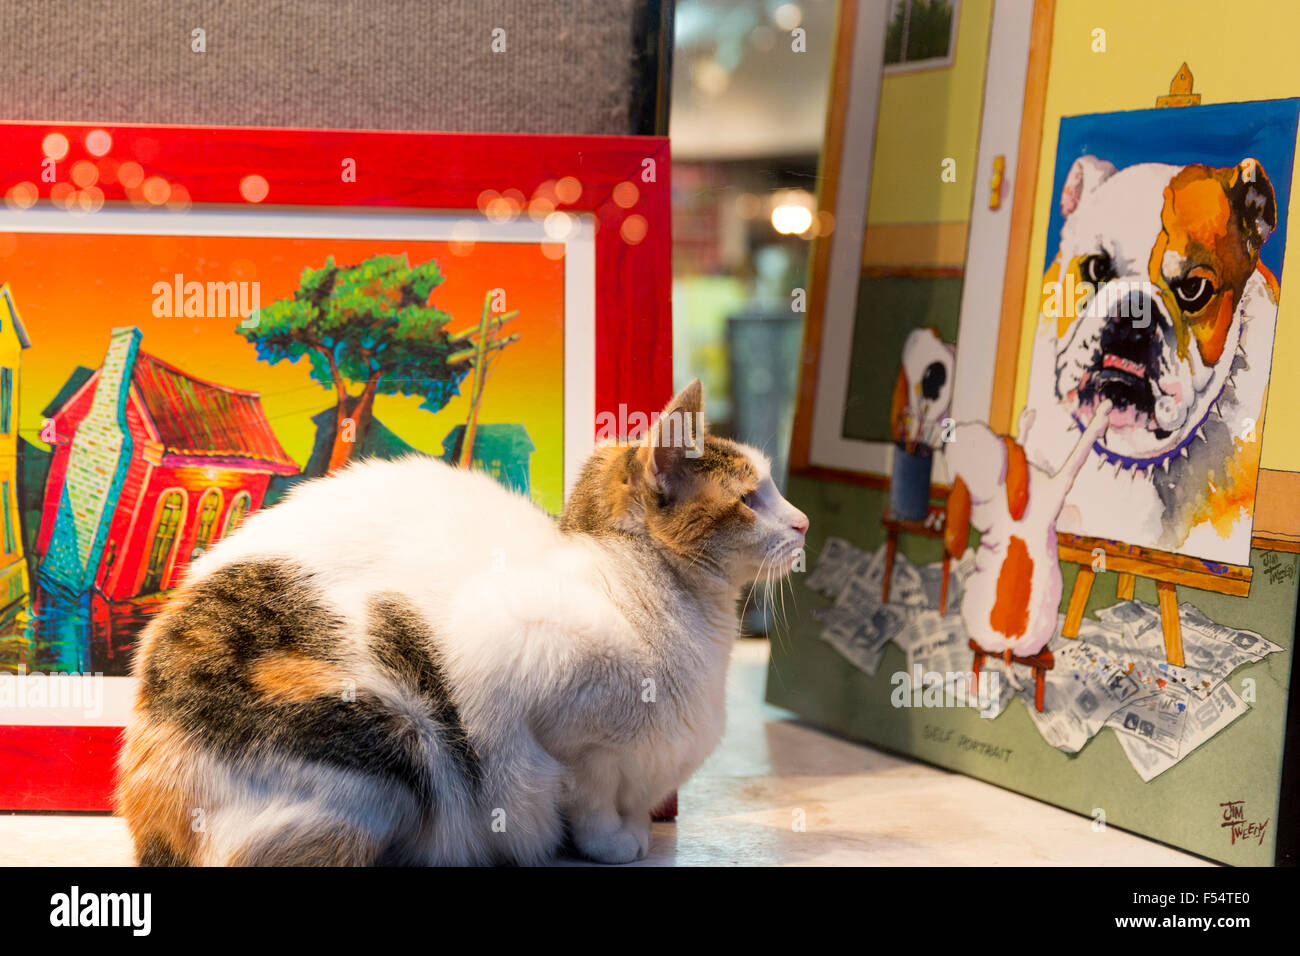 Cat eyeballing dog picture in window of art gallery display in Royal Street, French Quarter, New Orleans, USA Stock Photo